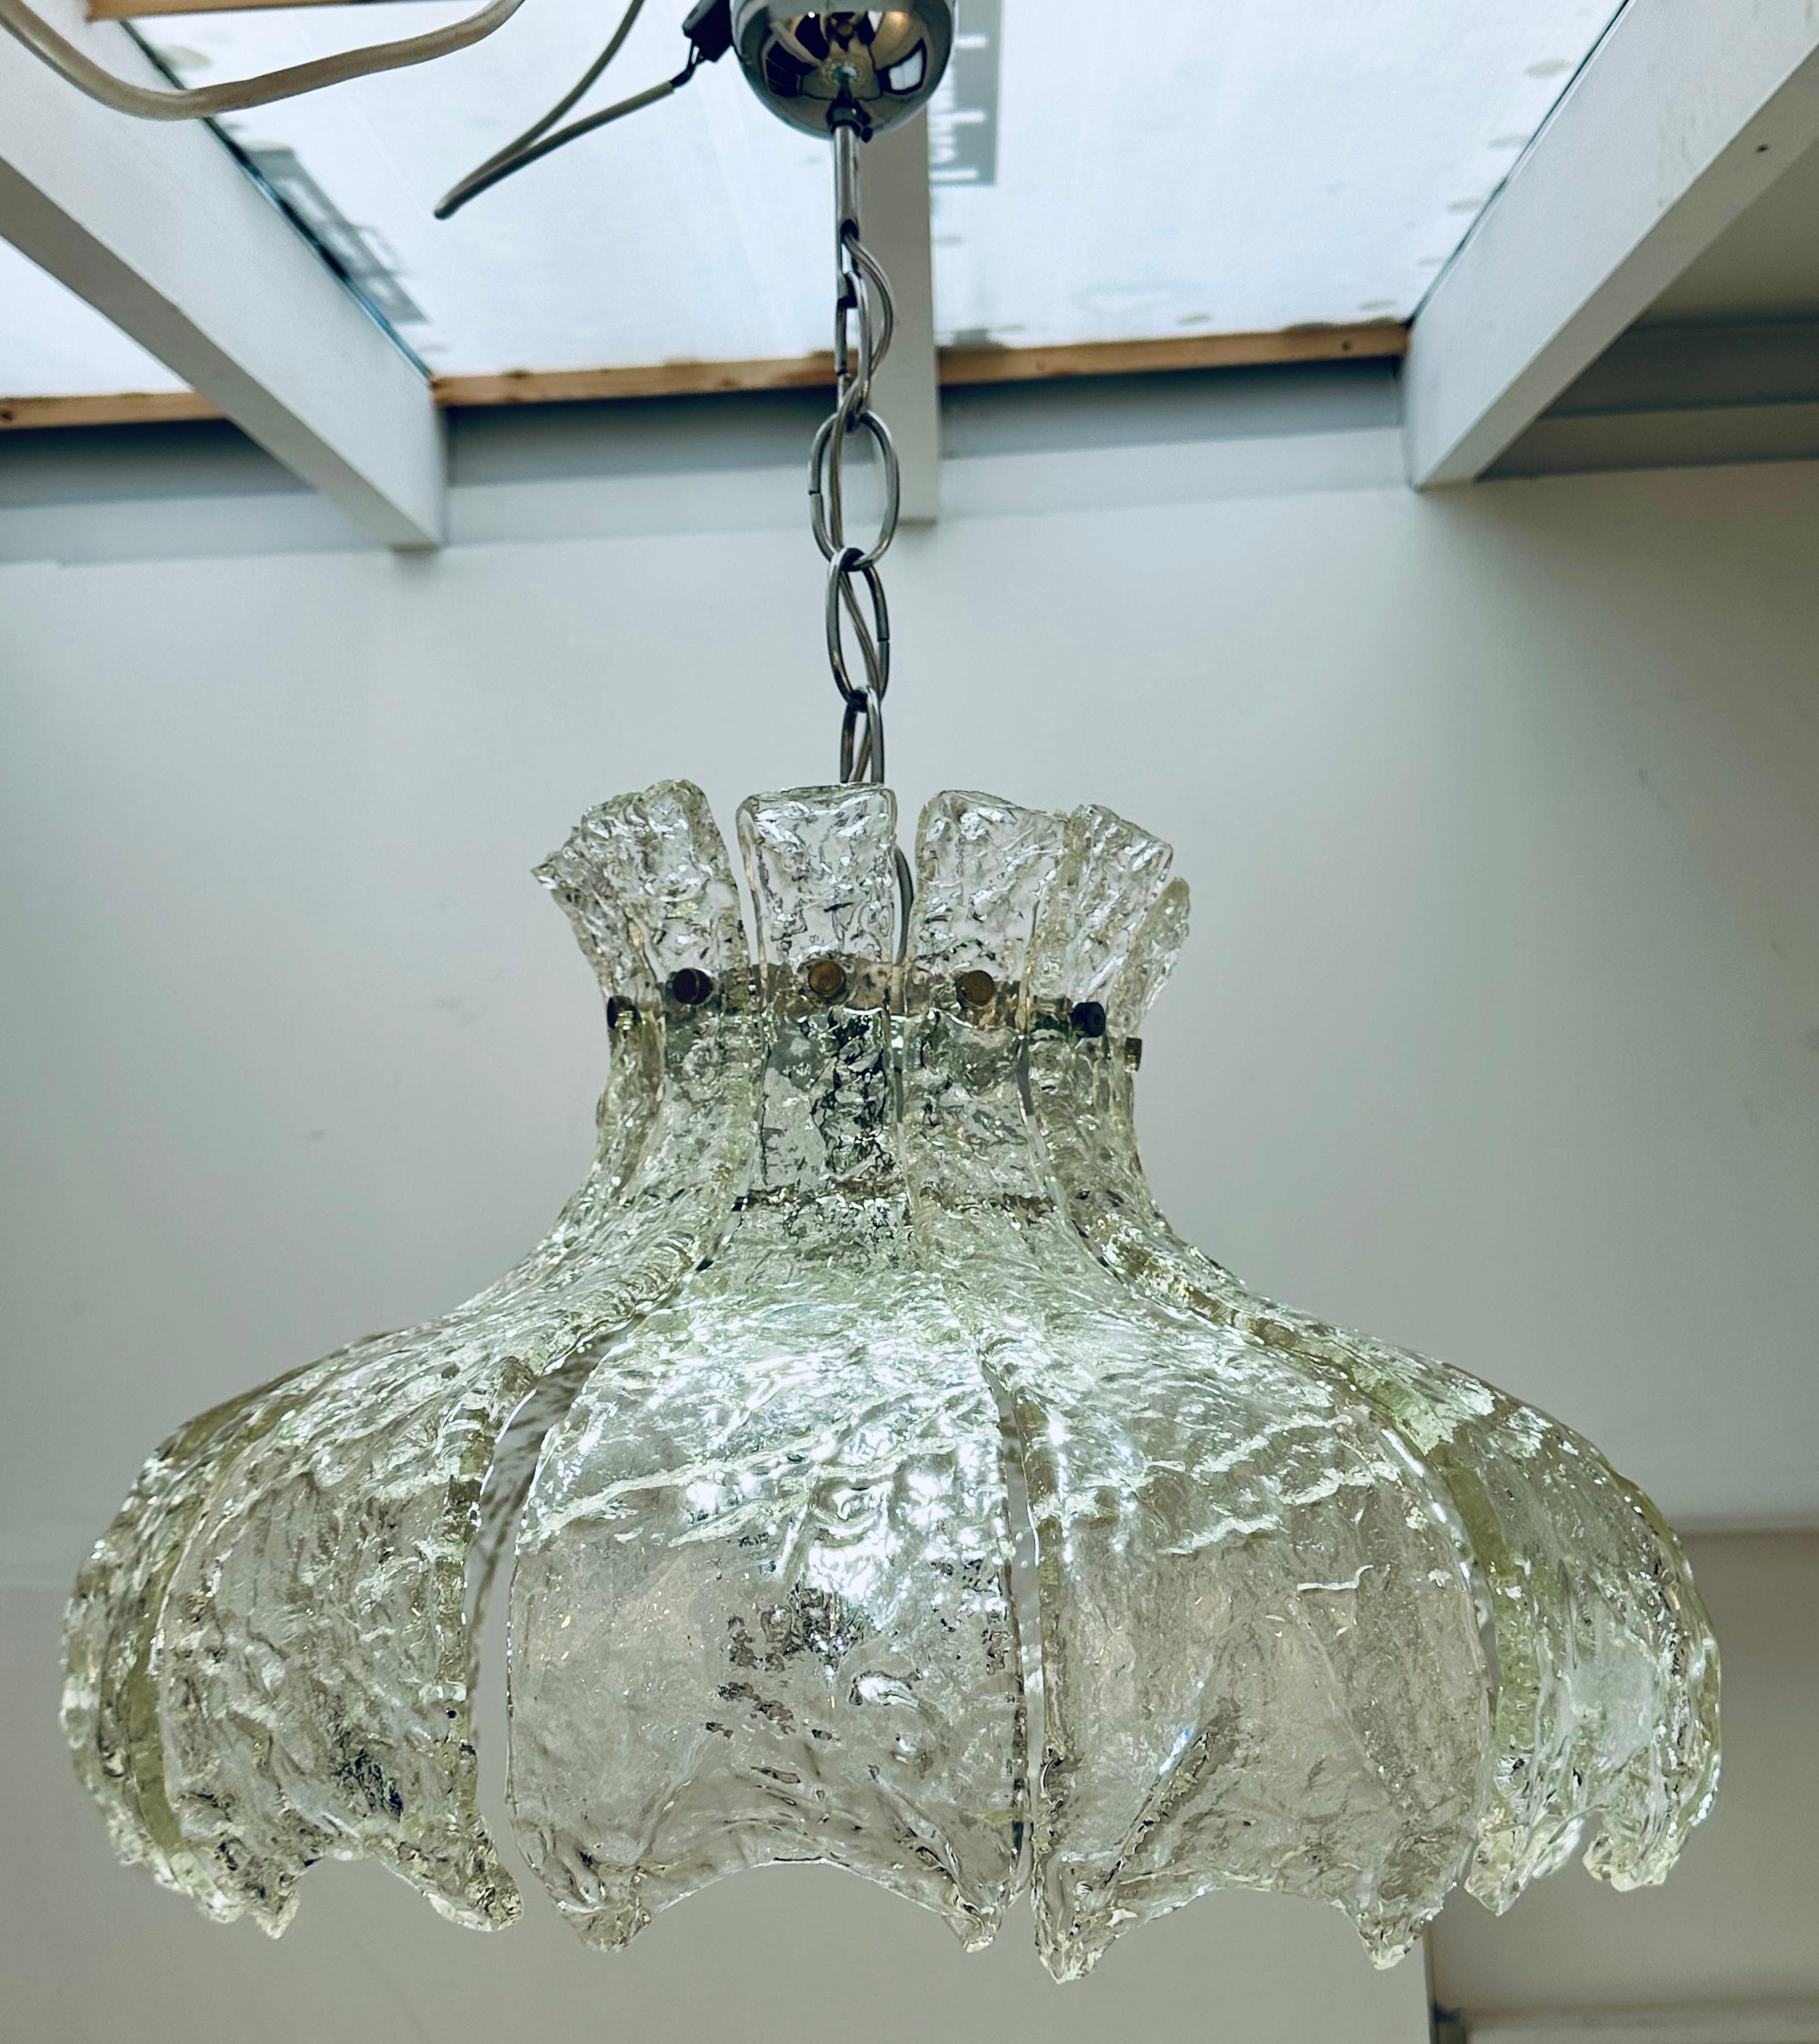 1960s Mid century Italian Murano glass hanging light with 12 individual curved textured thick clear glass forked petals which are secured with a small chrome flat-head screw onto a chromed-metal frame to form a large hanging tulip flower. Comme vous